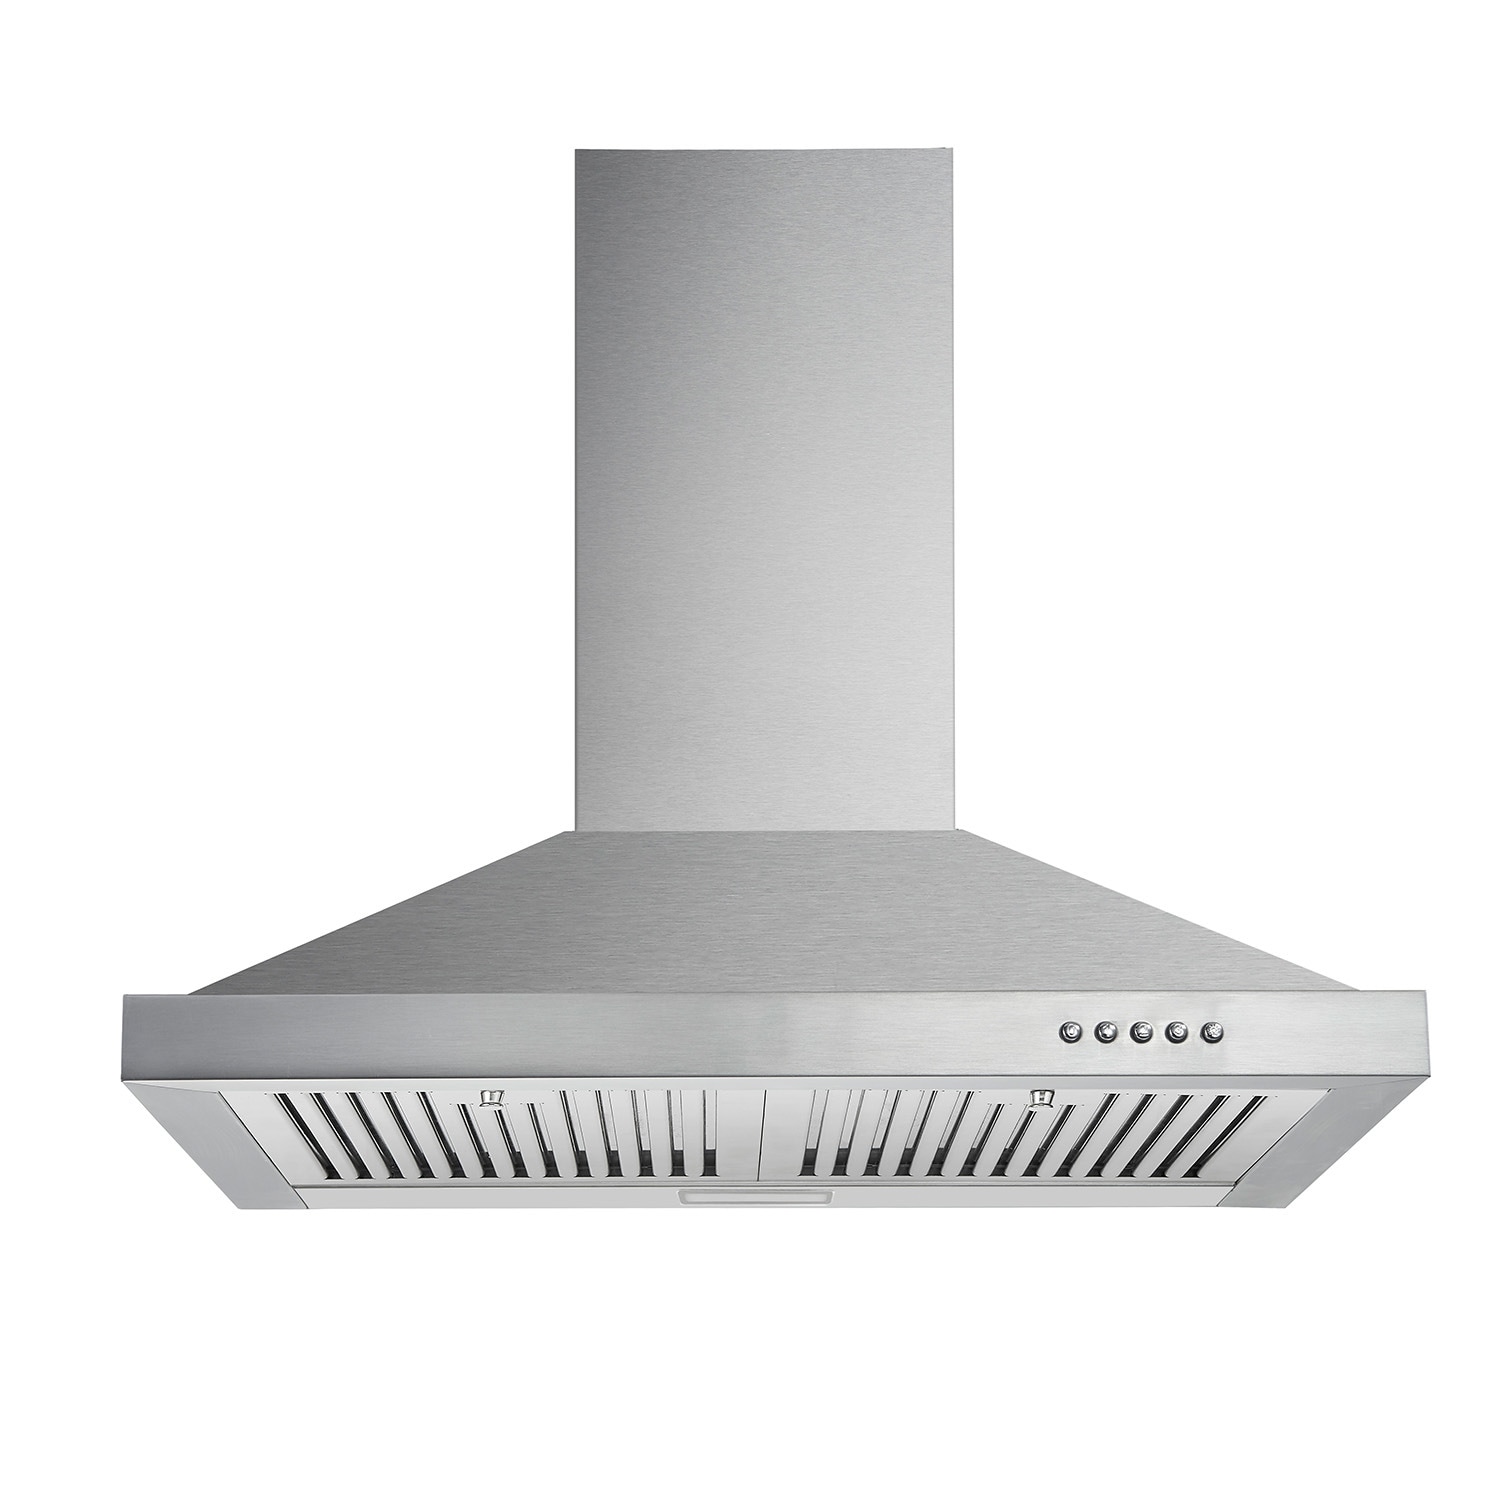 JUSHUA 30 inch Wall Mounted Kitchen Range Hood Stainless Steel 450 CFM Vent LED Lamp 3-Speed New